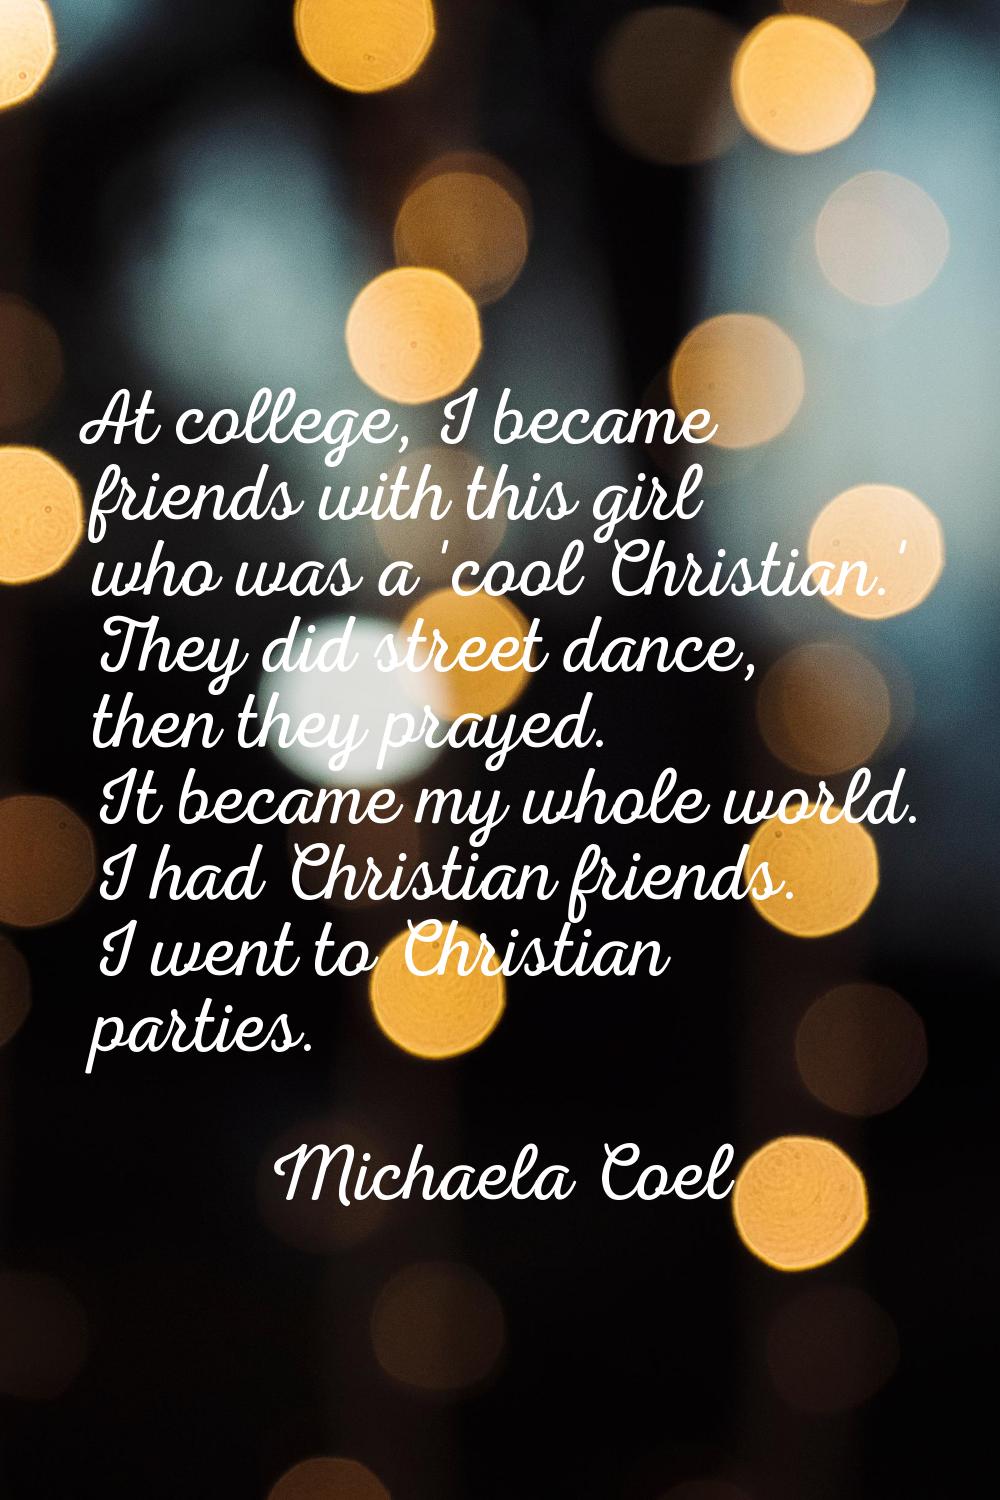 At college, I became friends with this girl who was a 'cool Christian.' They did street dance, then